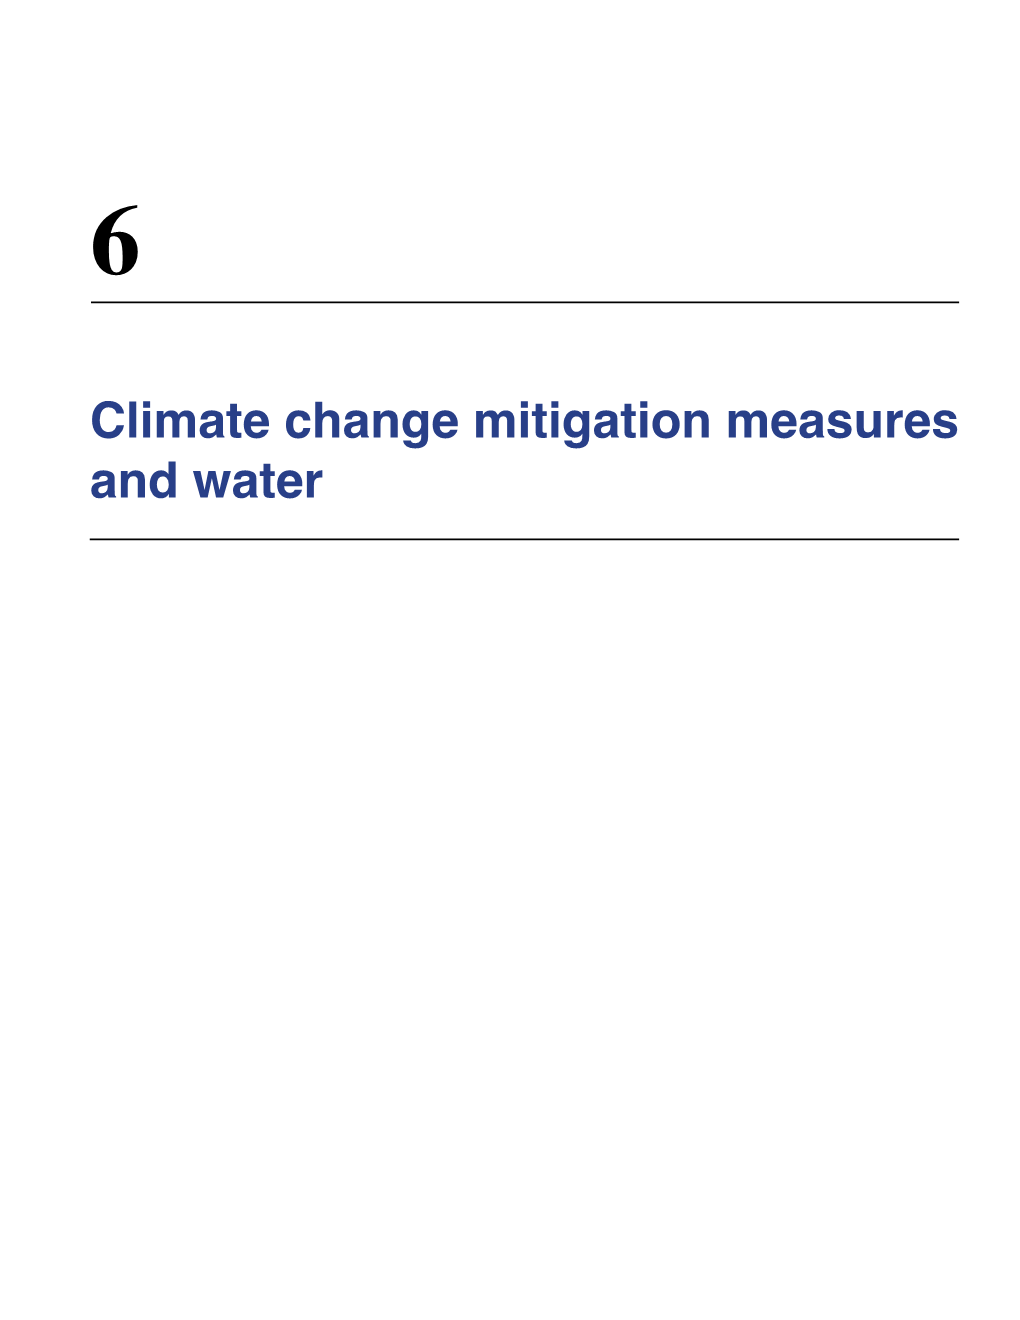 Chapter 6 Climate Change Mitigation Measures and Water